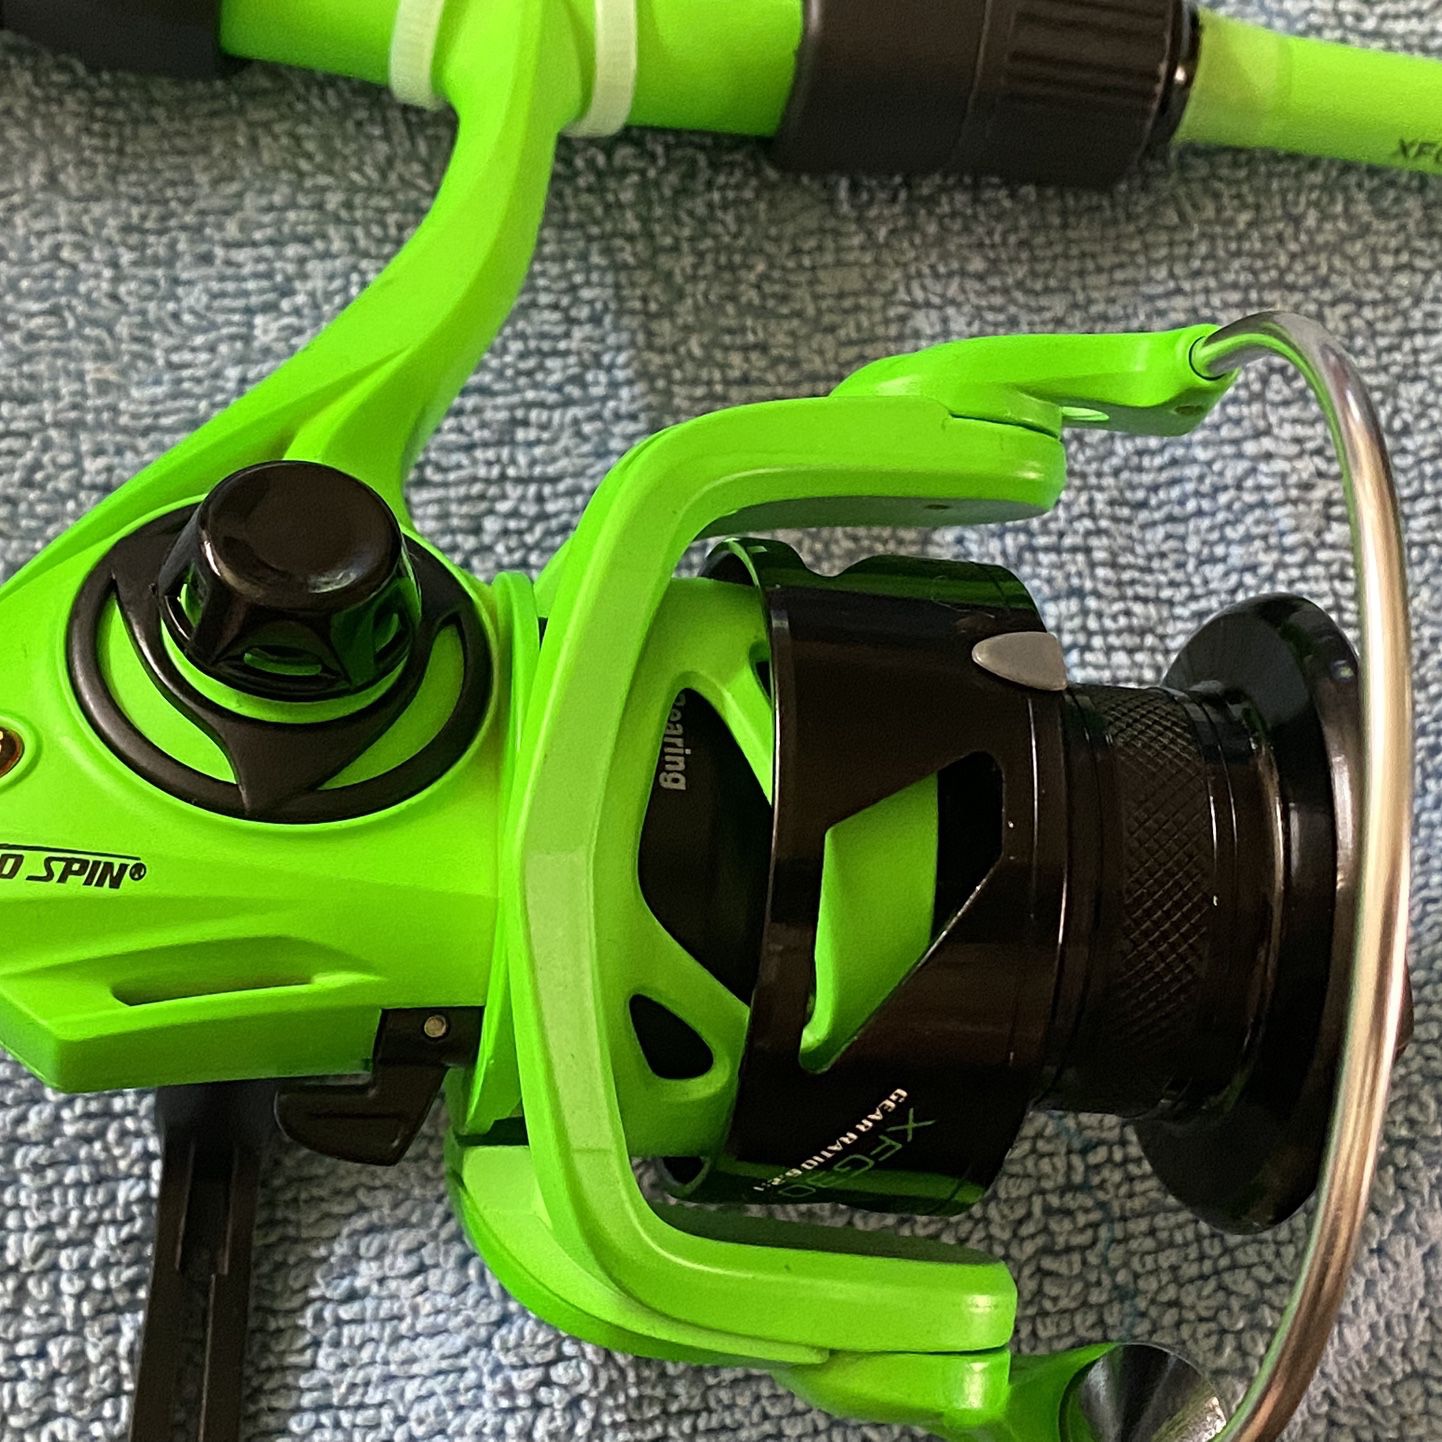 Spinning reel for Sale in Hesperia, CA - OfferUp